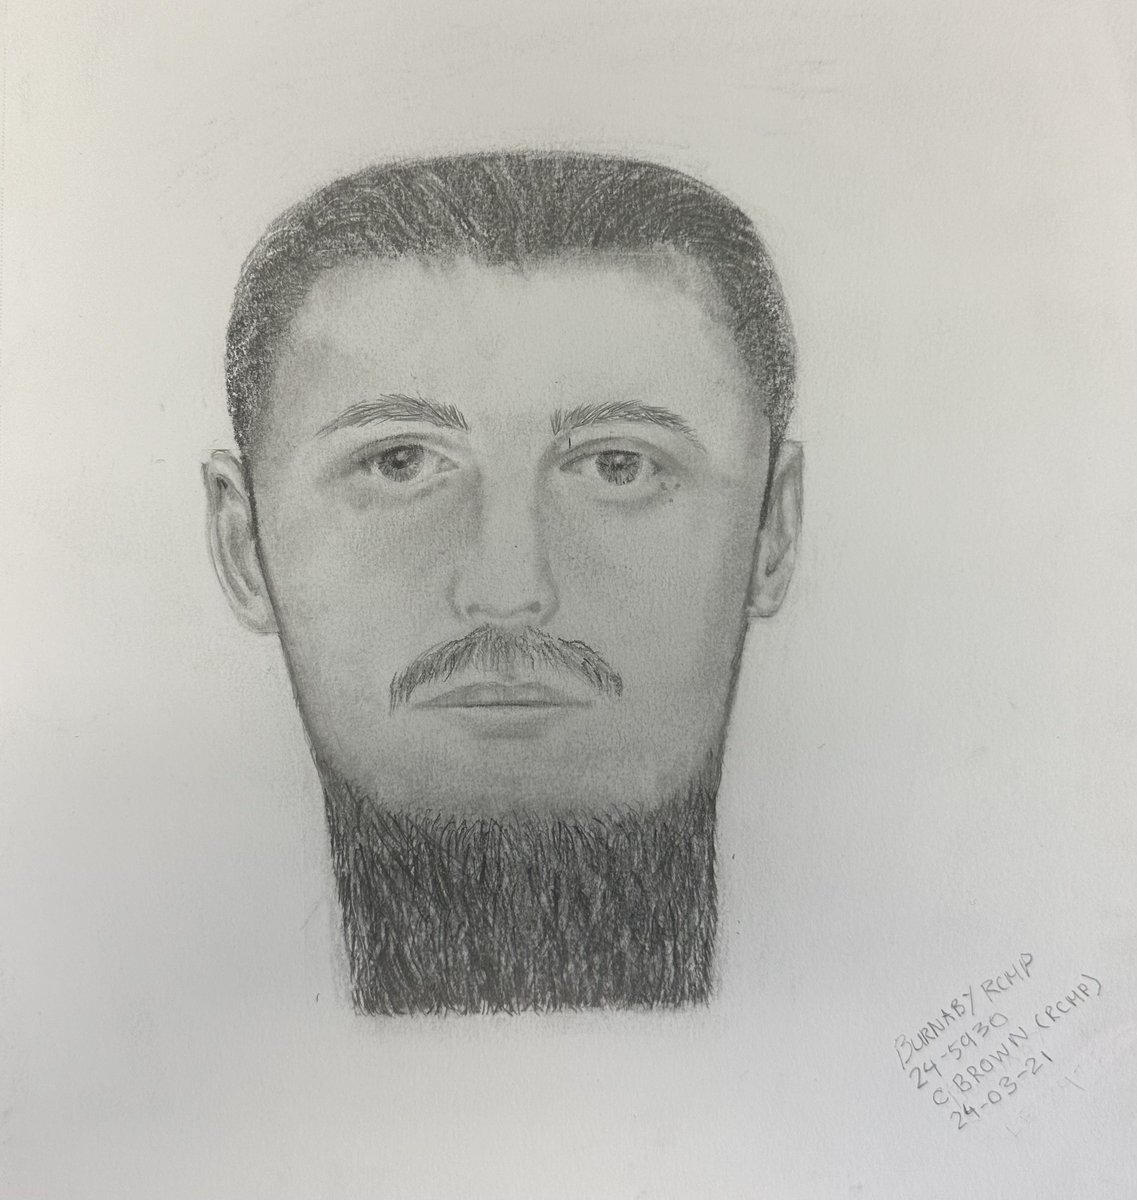 Burnaby RCMP releases sketch of suspect after senior sexually assaulted in Central Park shorturl.at/mrX19